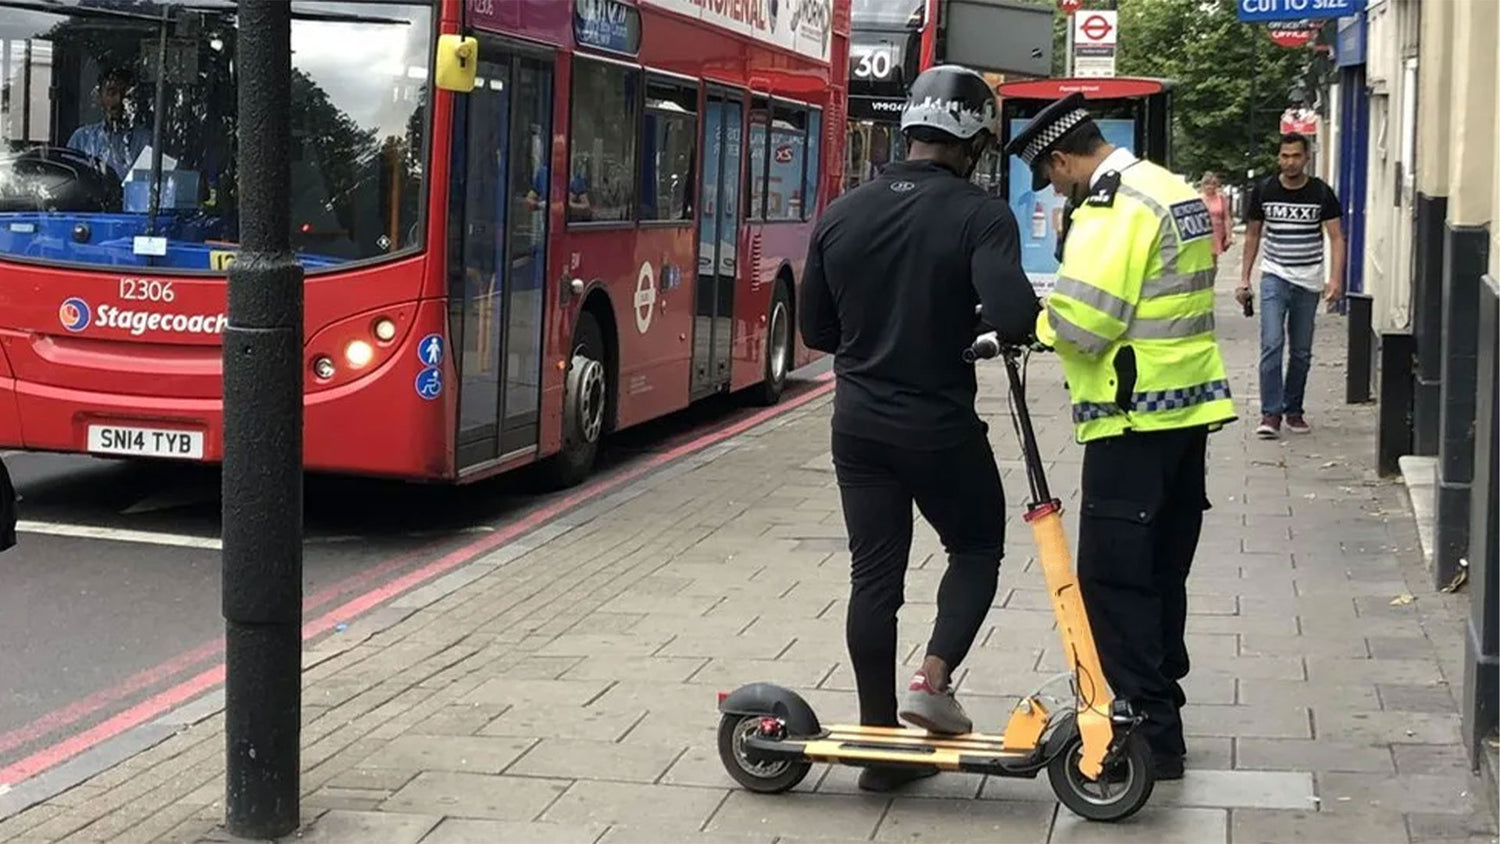 How do you safely ride an electric scooter?